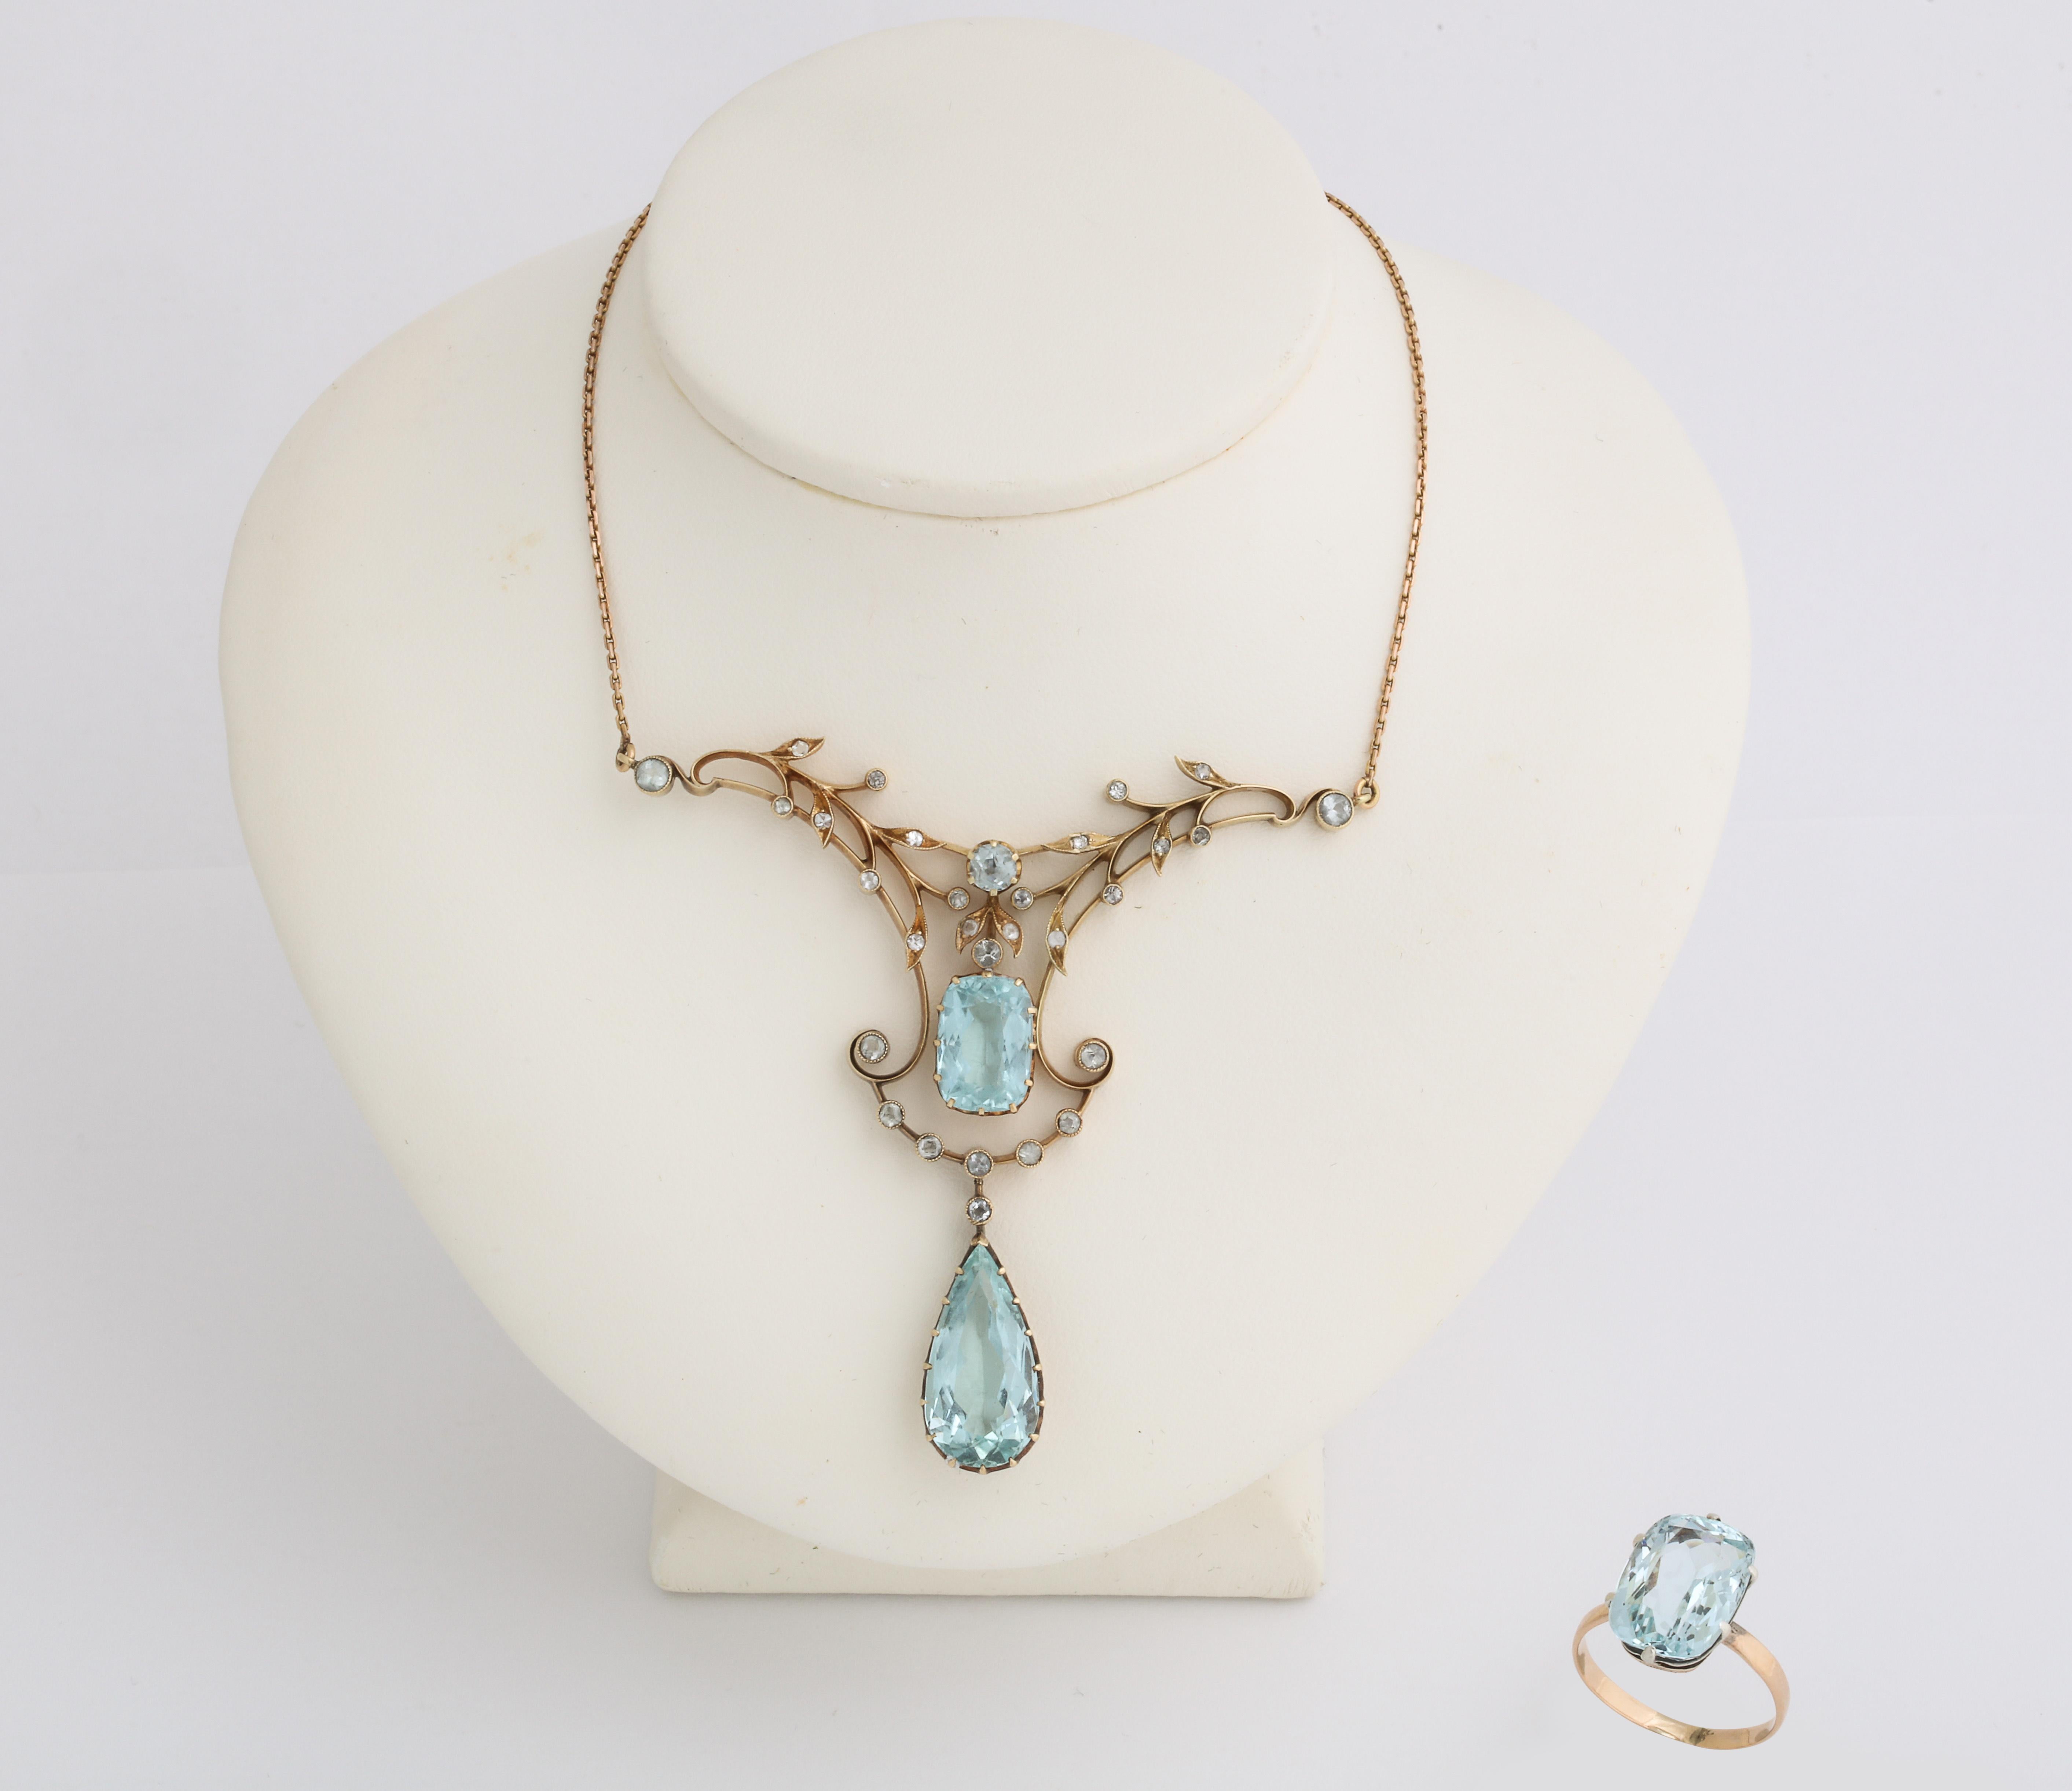 This rare Russian necklace is from the Romanov era, period of Tsar Nicholas II. It comprises a beautiful garland of scrolling and foliate design and is set with a pear-shaped aquamarine suspended from a cushion-shaped aquamarine which is accented by